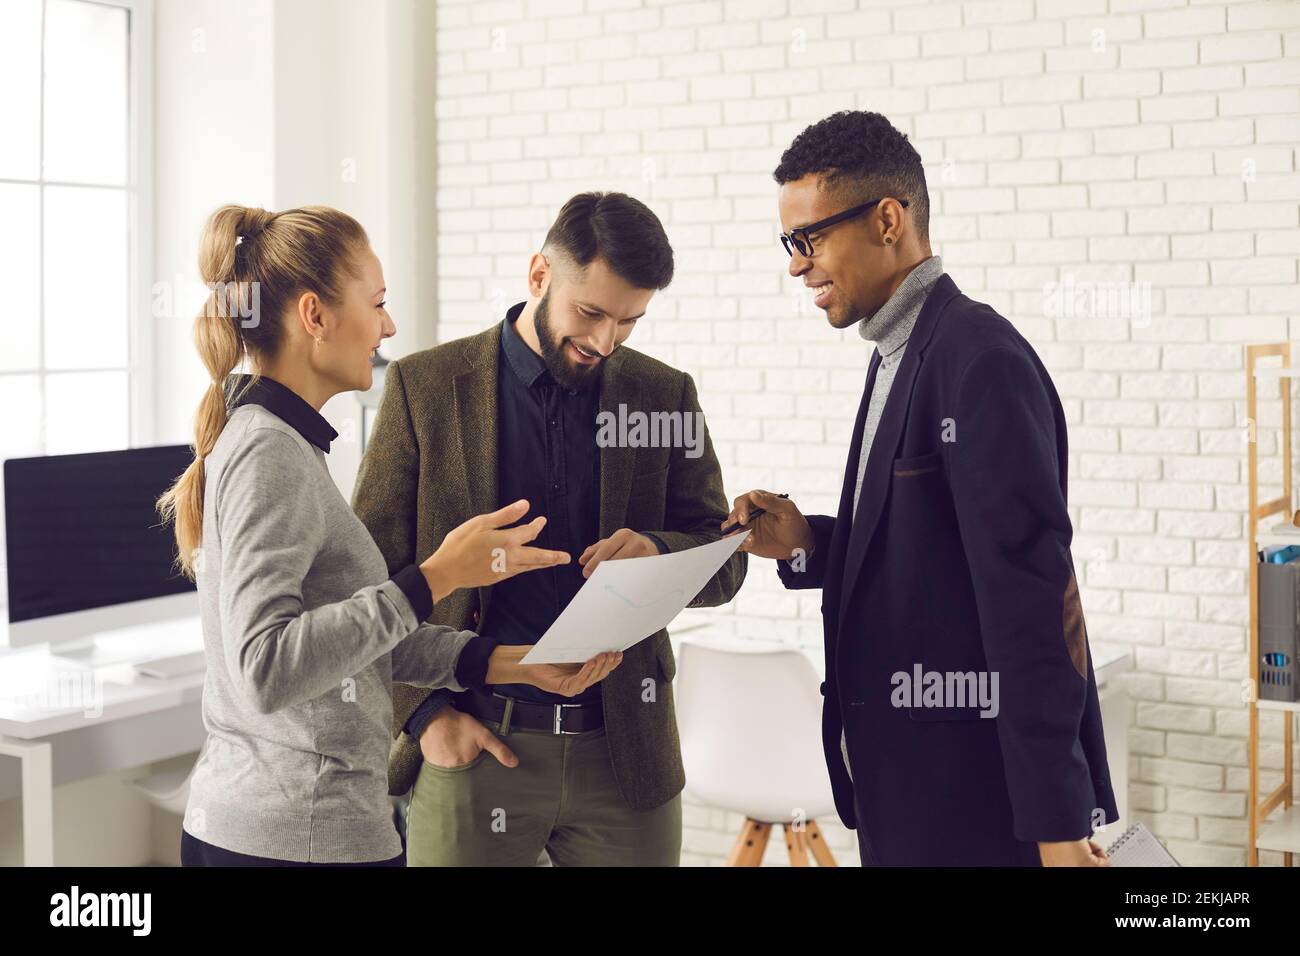 Brainstorming, negotiations, multiethnic business group team concept Stock Photo